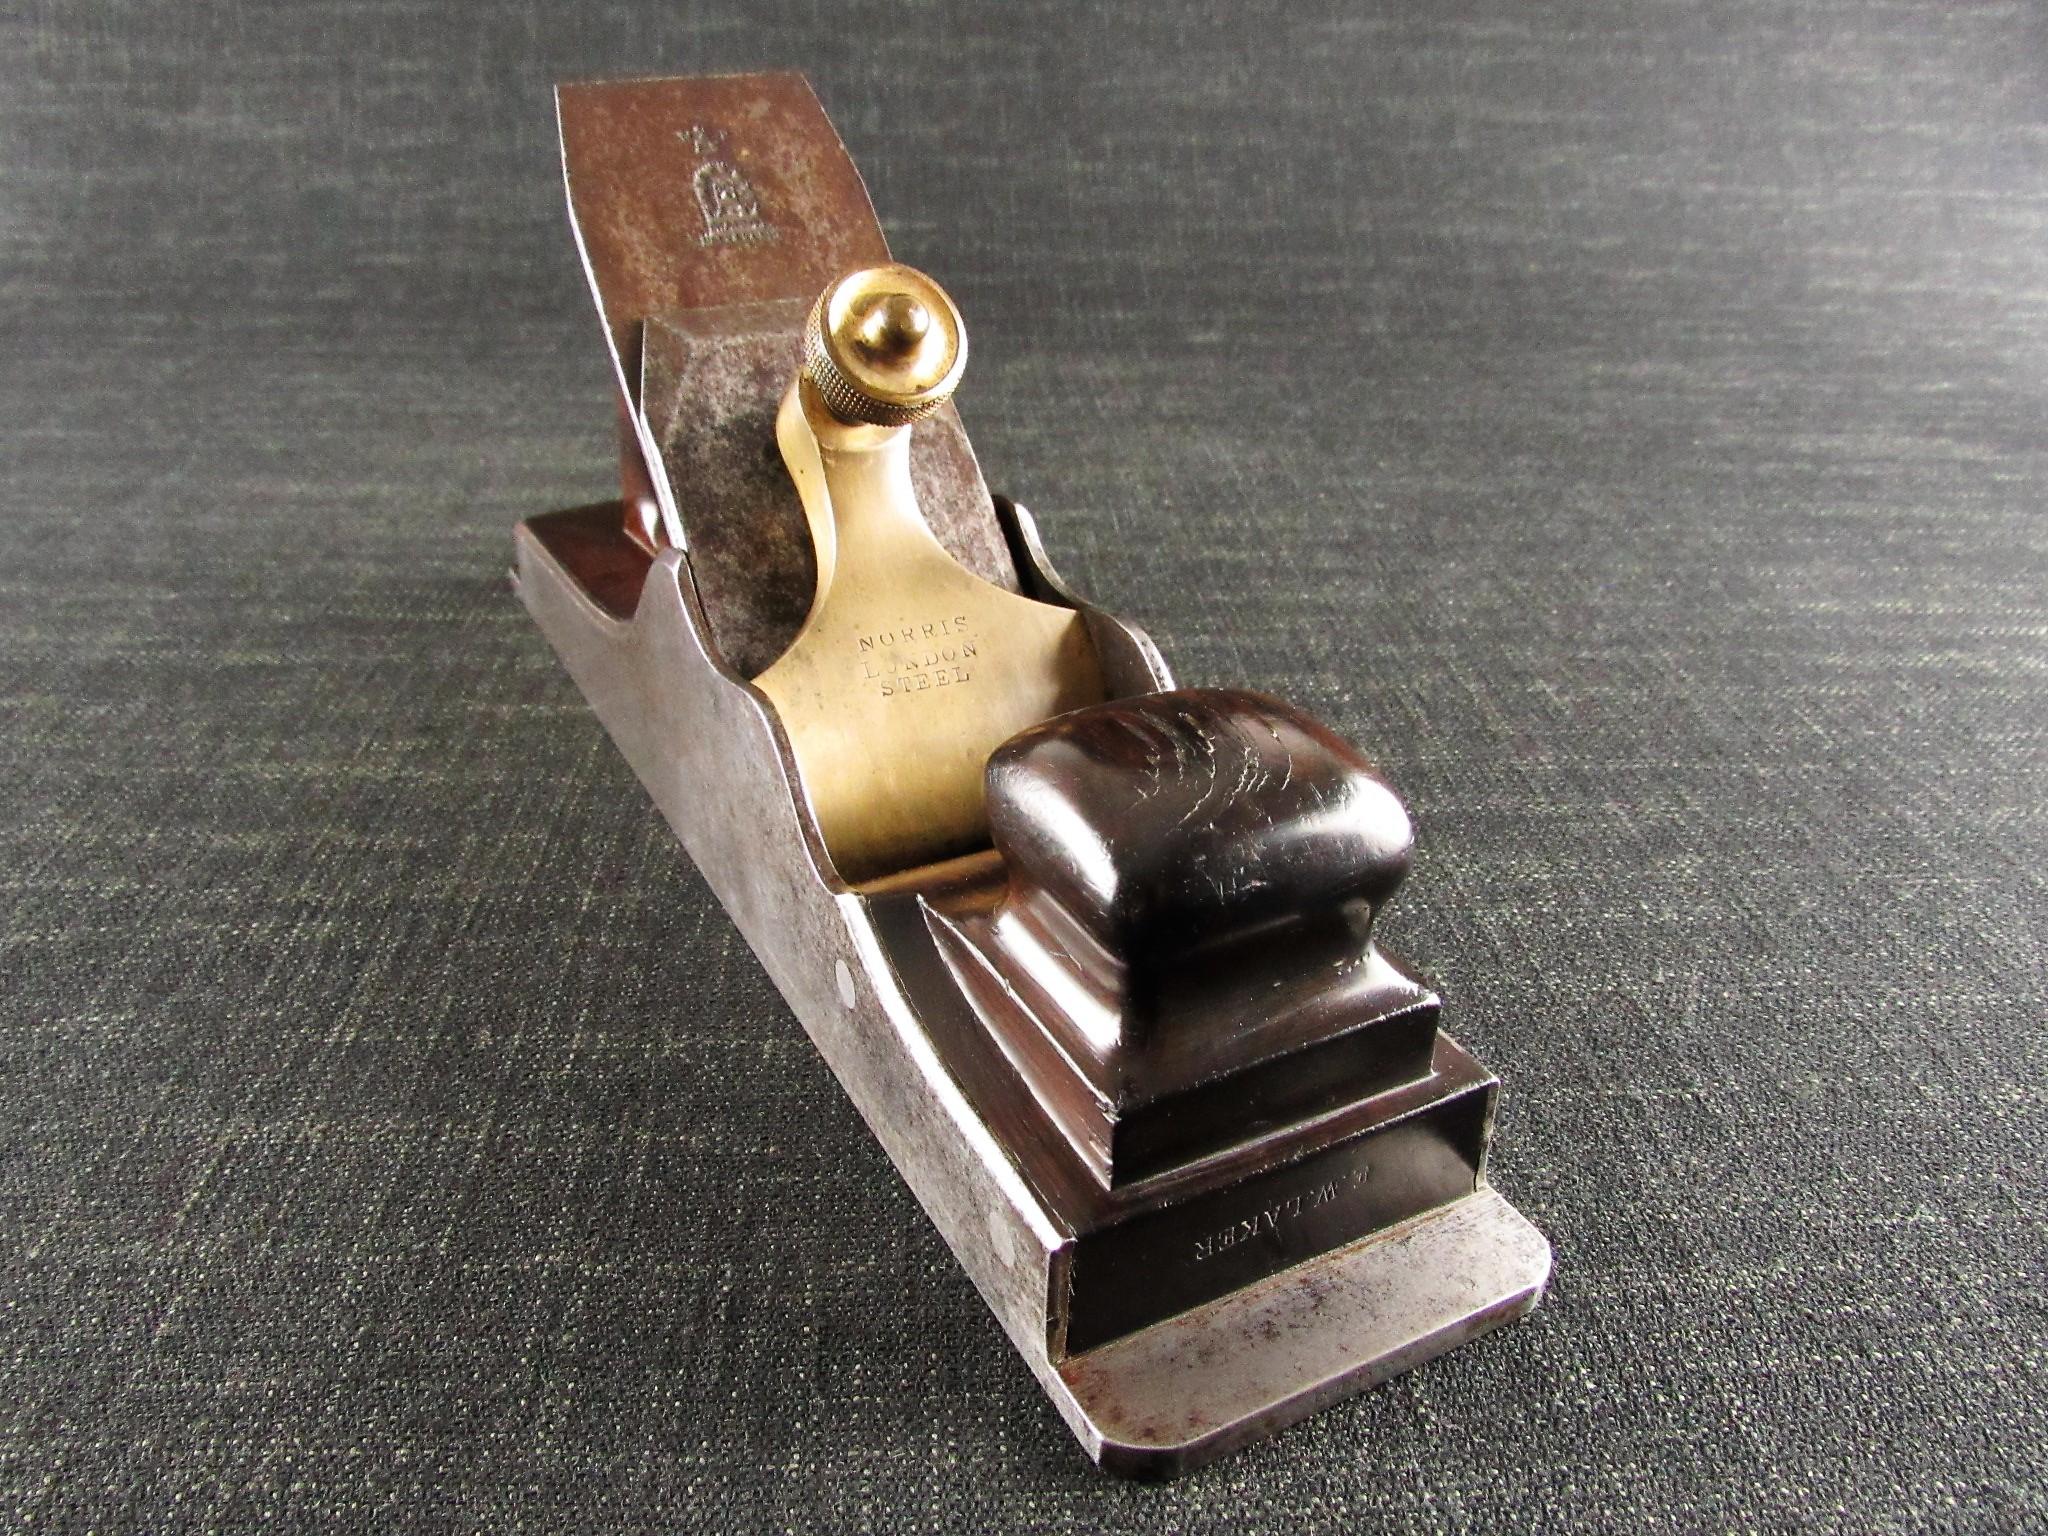 An Unusual Norris Panel Plane - by Mathieson?